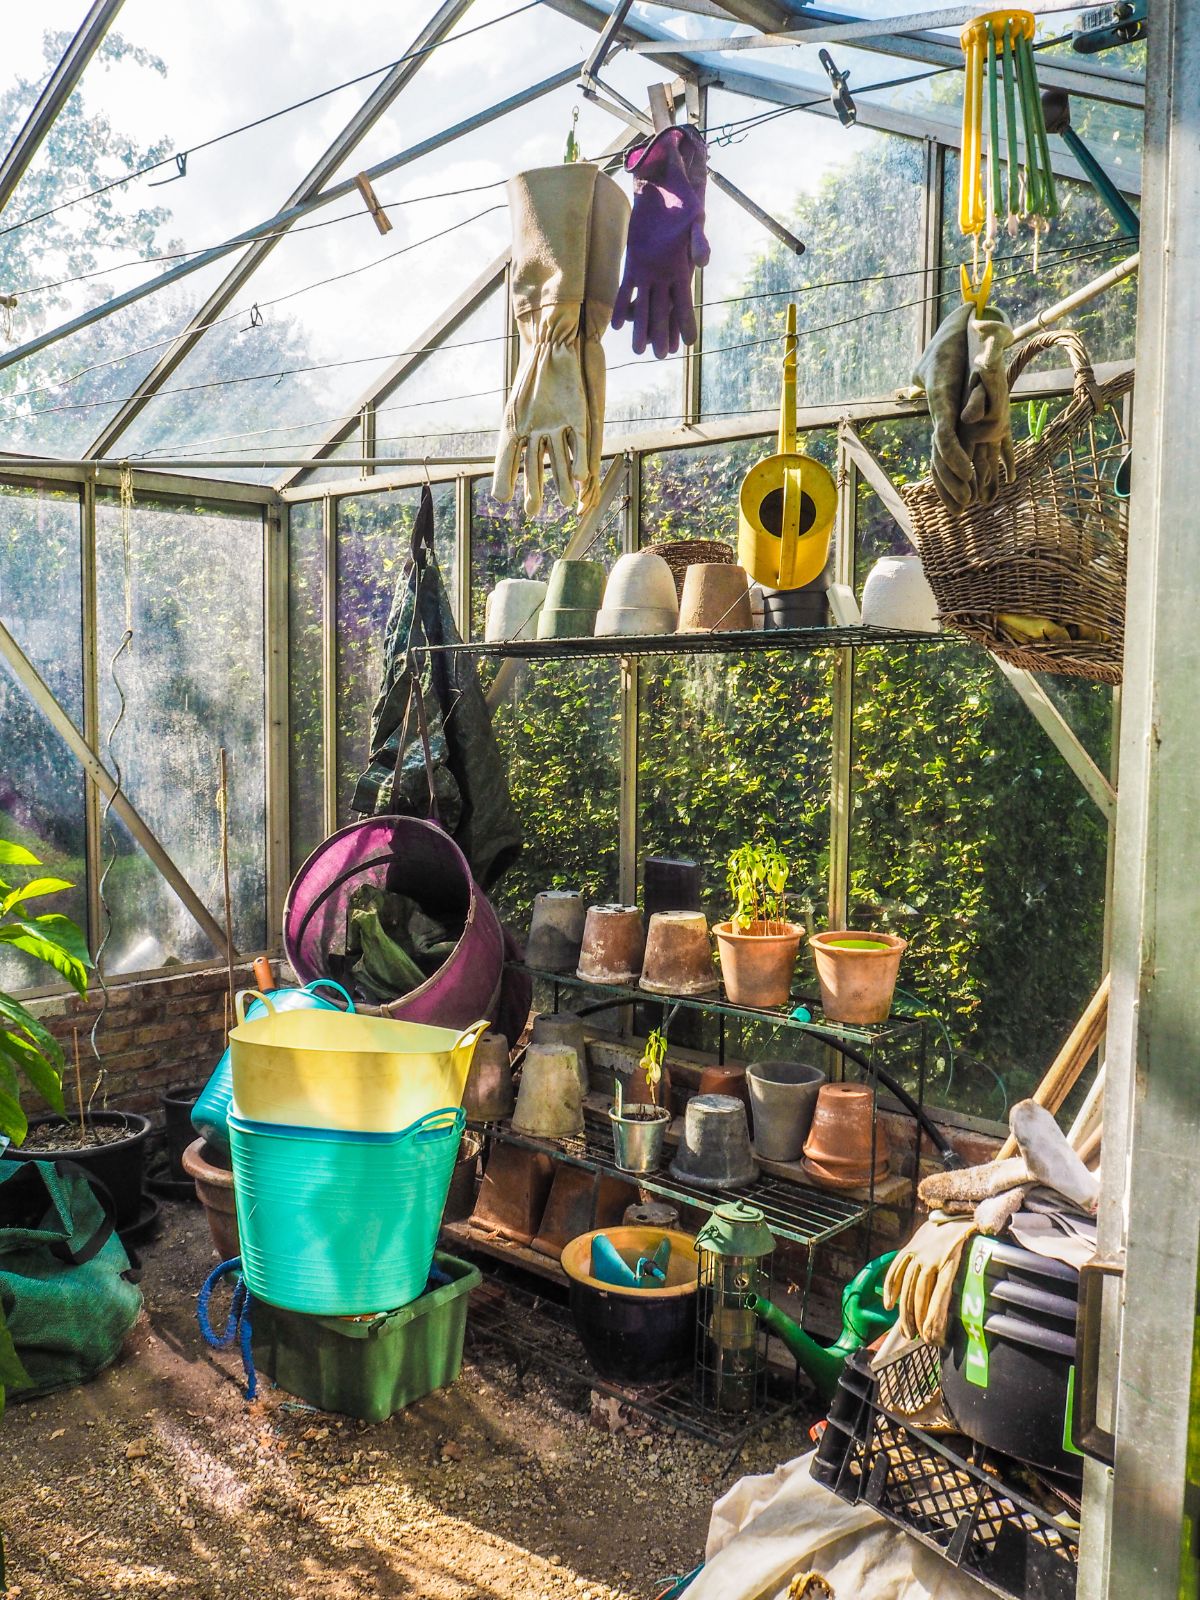 Plants and pots overwintering in a greenhouse